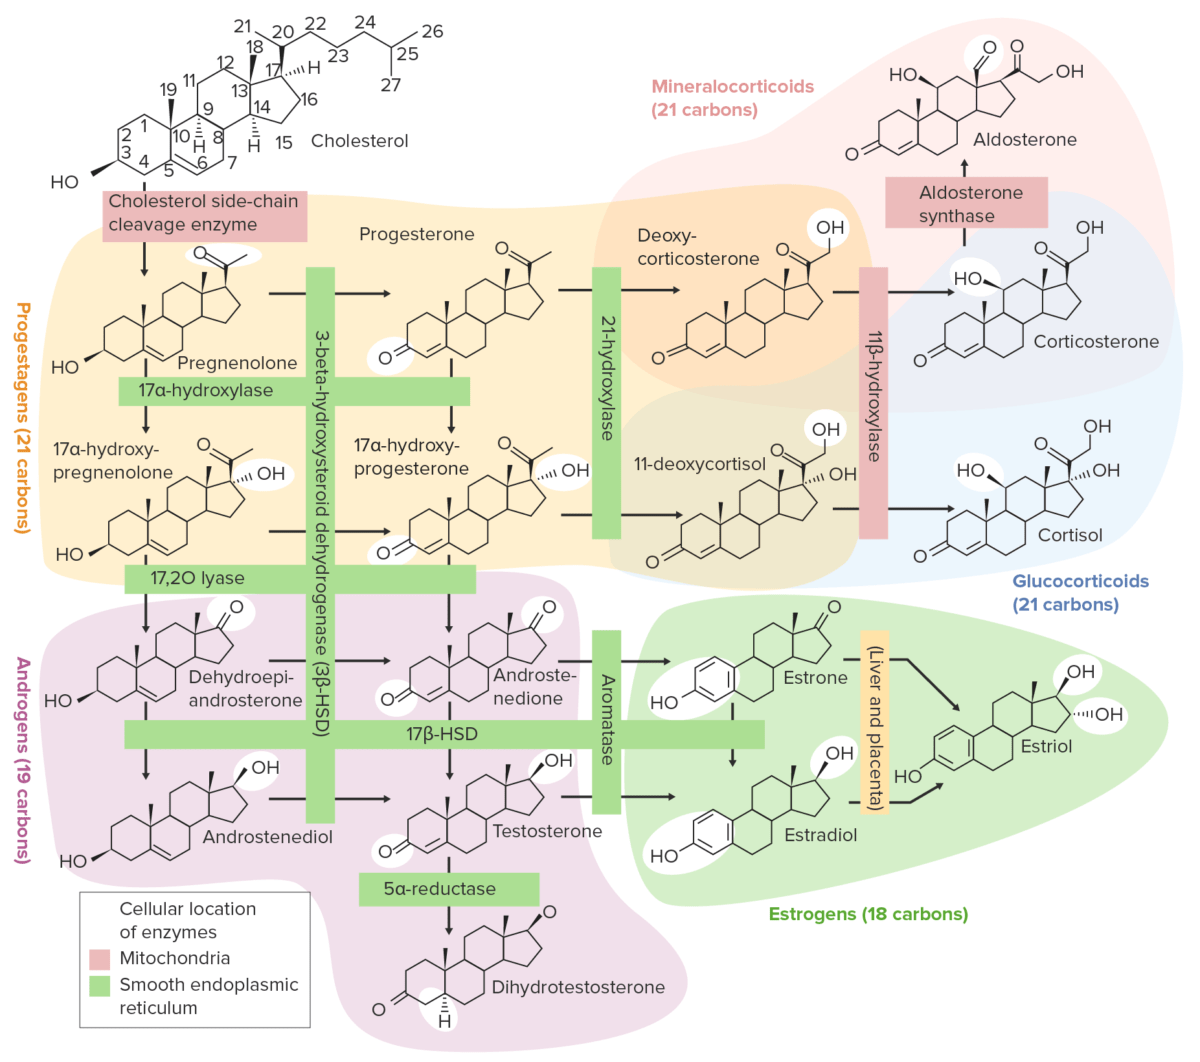 Overview of the steroidogenesis pathways